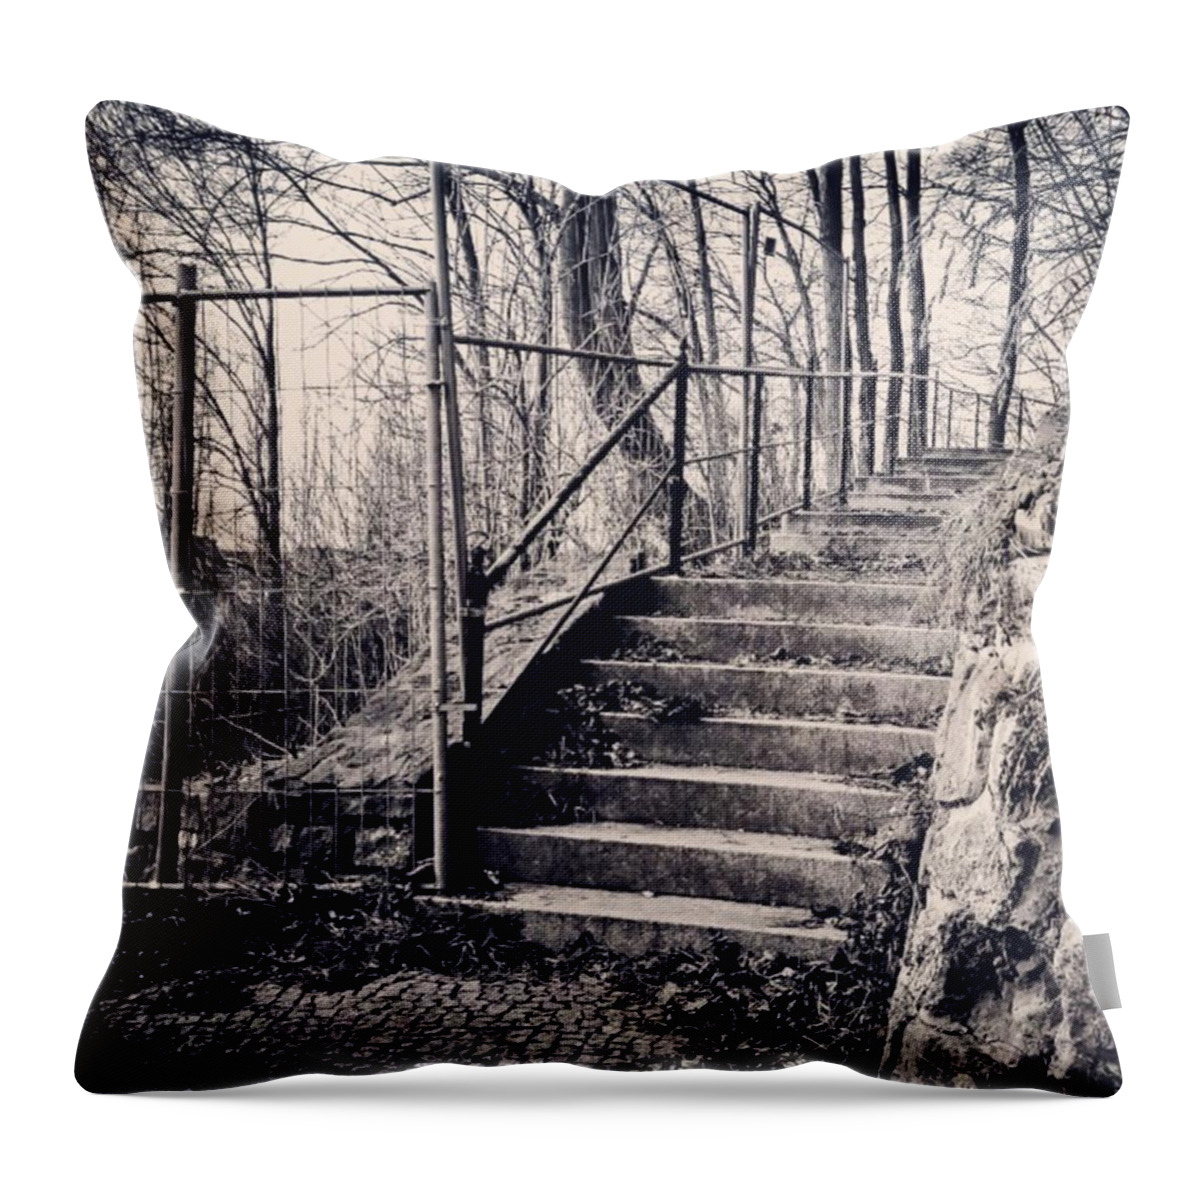 Sackgasse Throw Pillow featuring the photograph Tourismus-perle by Mandy Tabatt